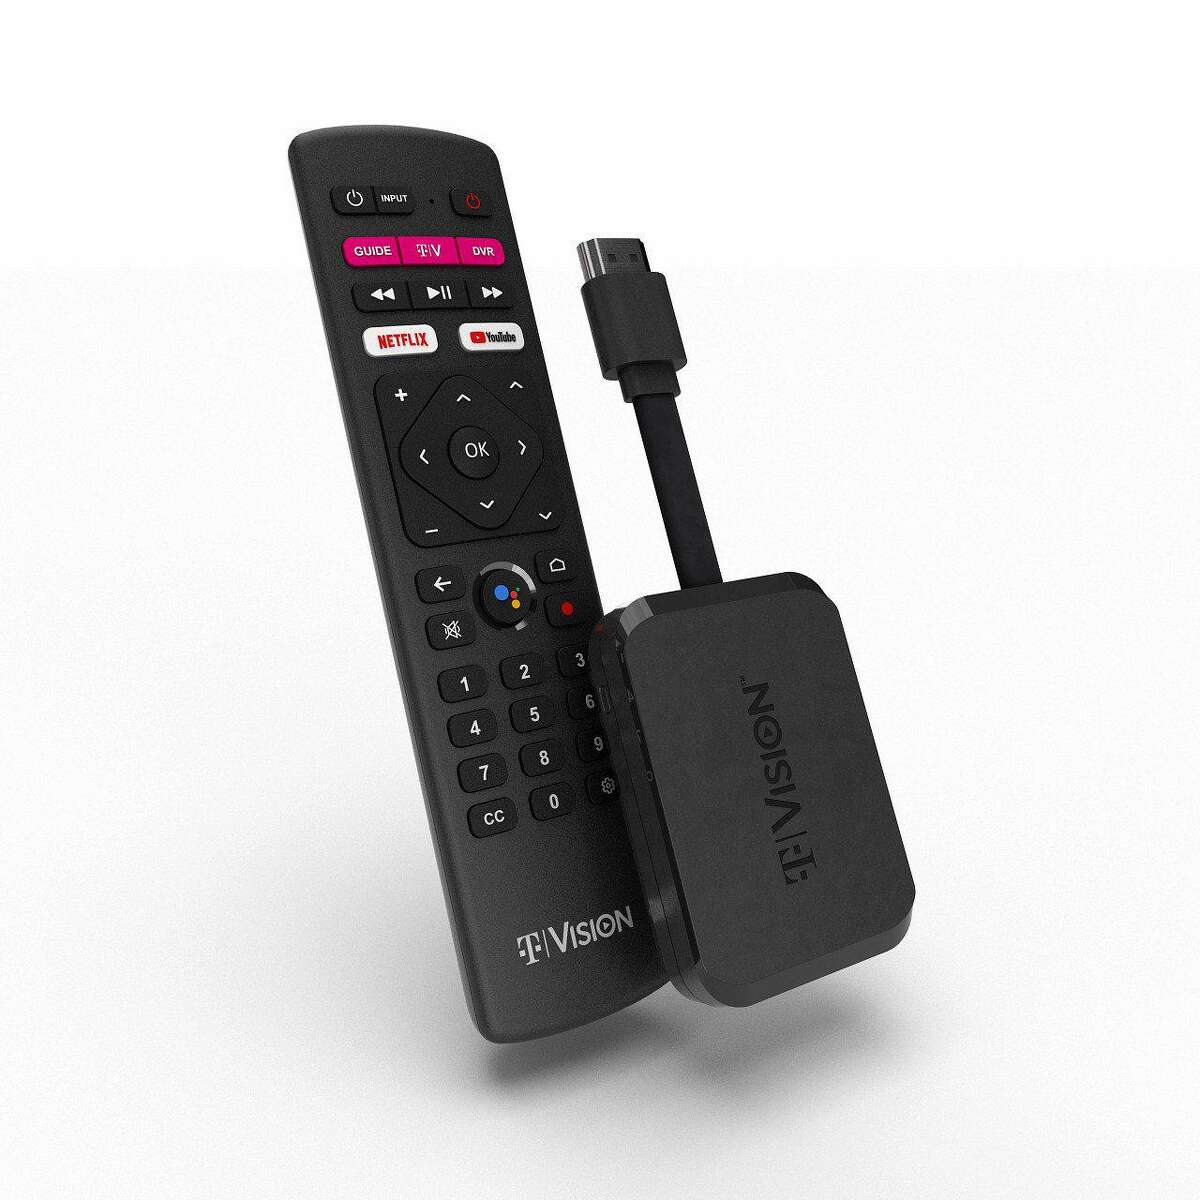 The $50 TVision Hub is an Android TV dongle that you plug into an HDMI port on your TV or computer monitor. It lets you use TVision, but it also allows you to download other streaming apps from the Google Play Store.